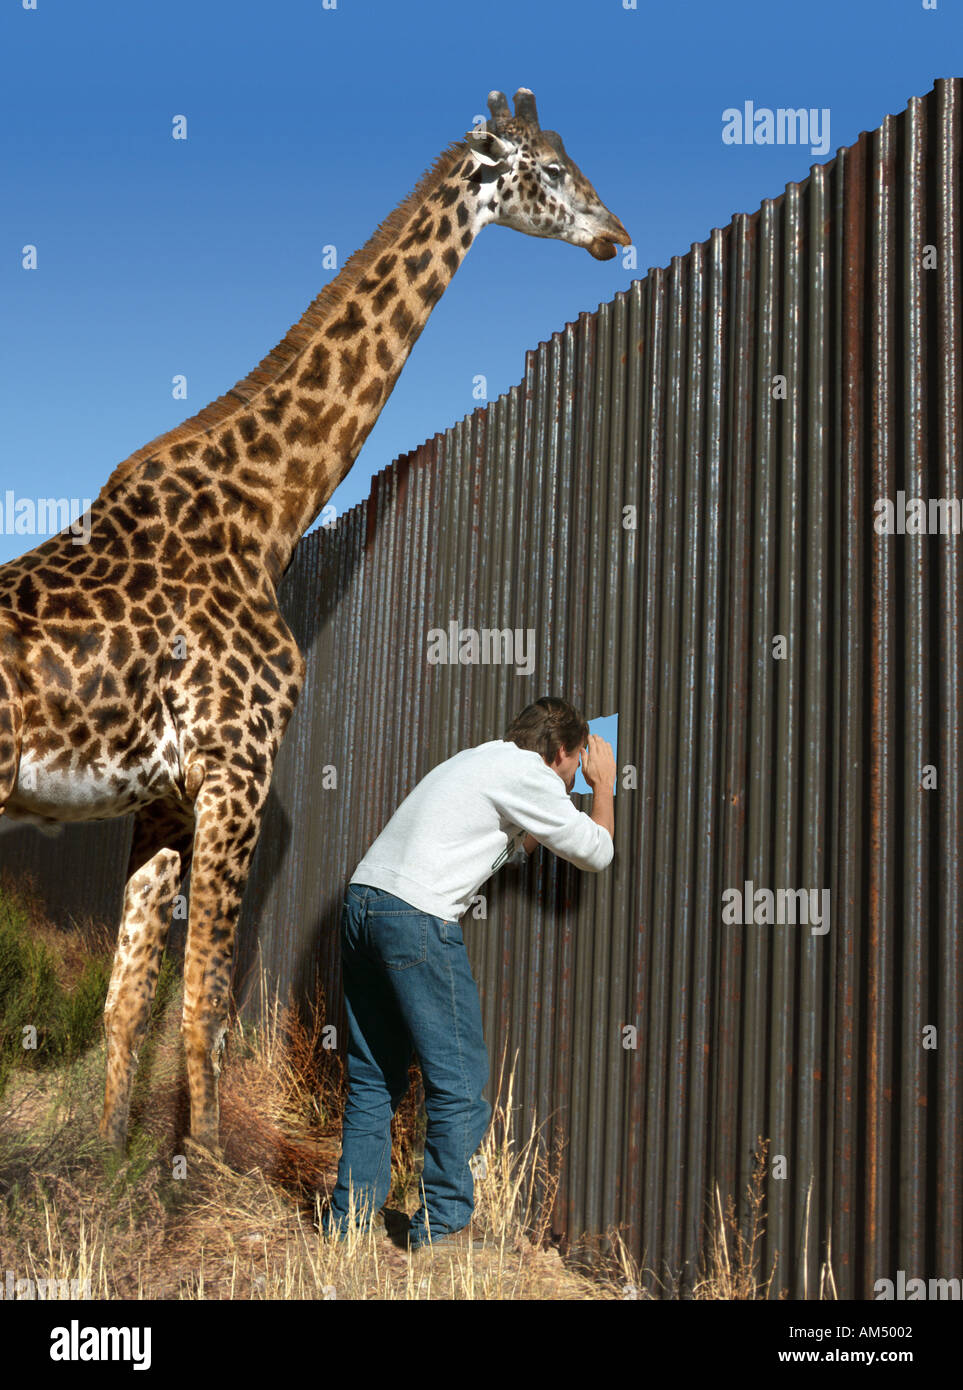 man peers through a hole in a fence and the giraffe peers over it Stock Photo